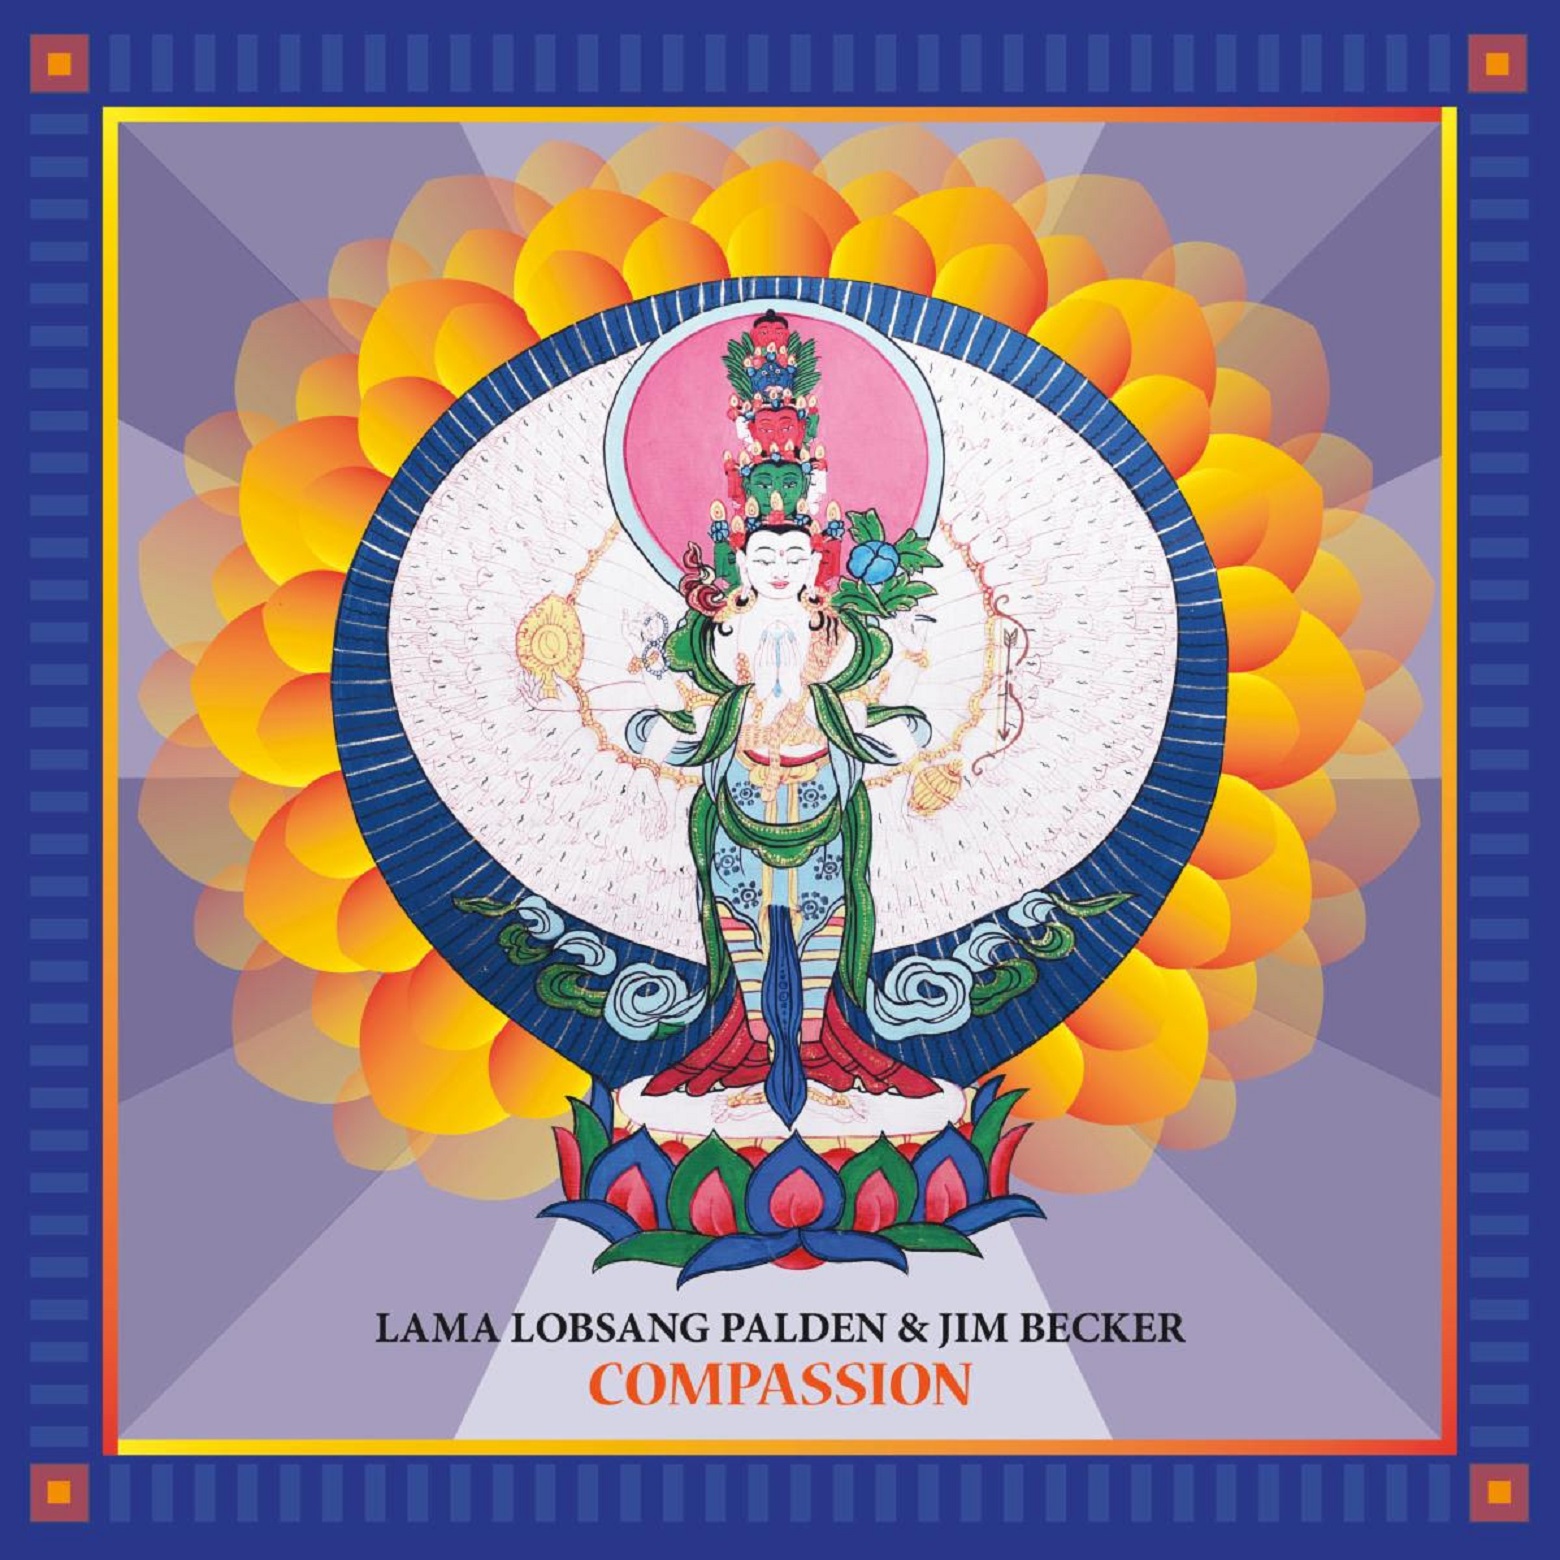 Announcing Lama Lobsang Palden and Jim Becker's Compassion, Out 10/9